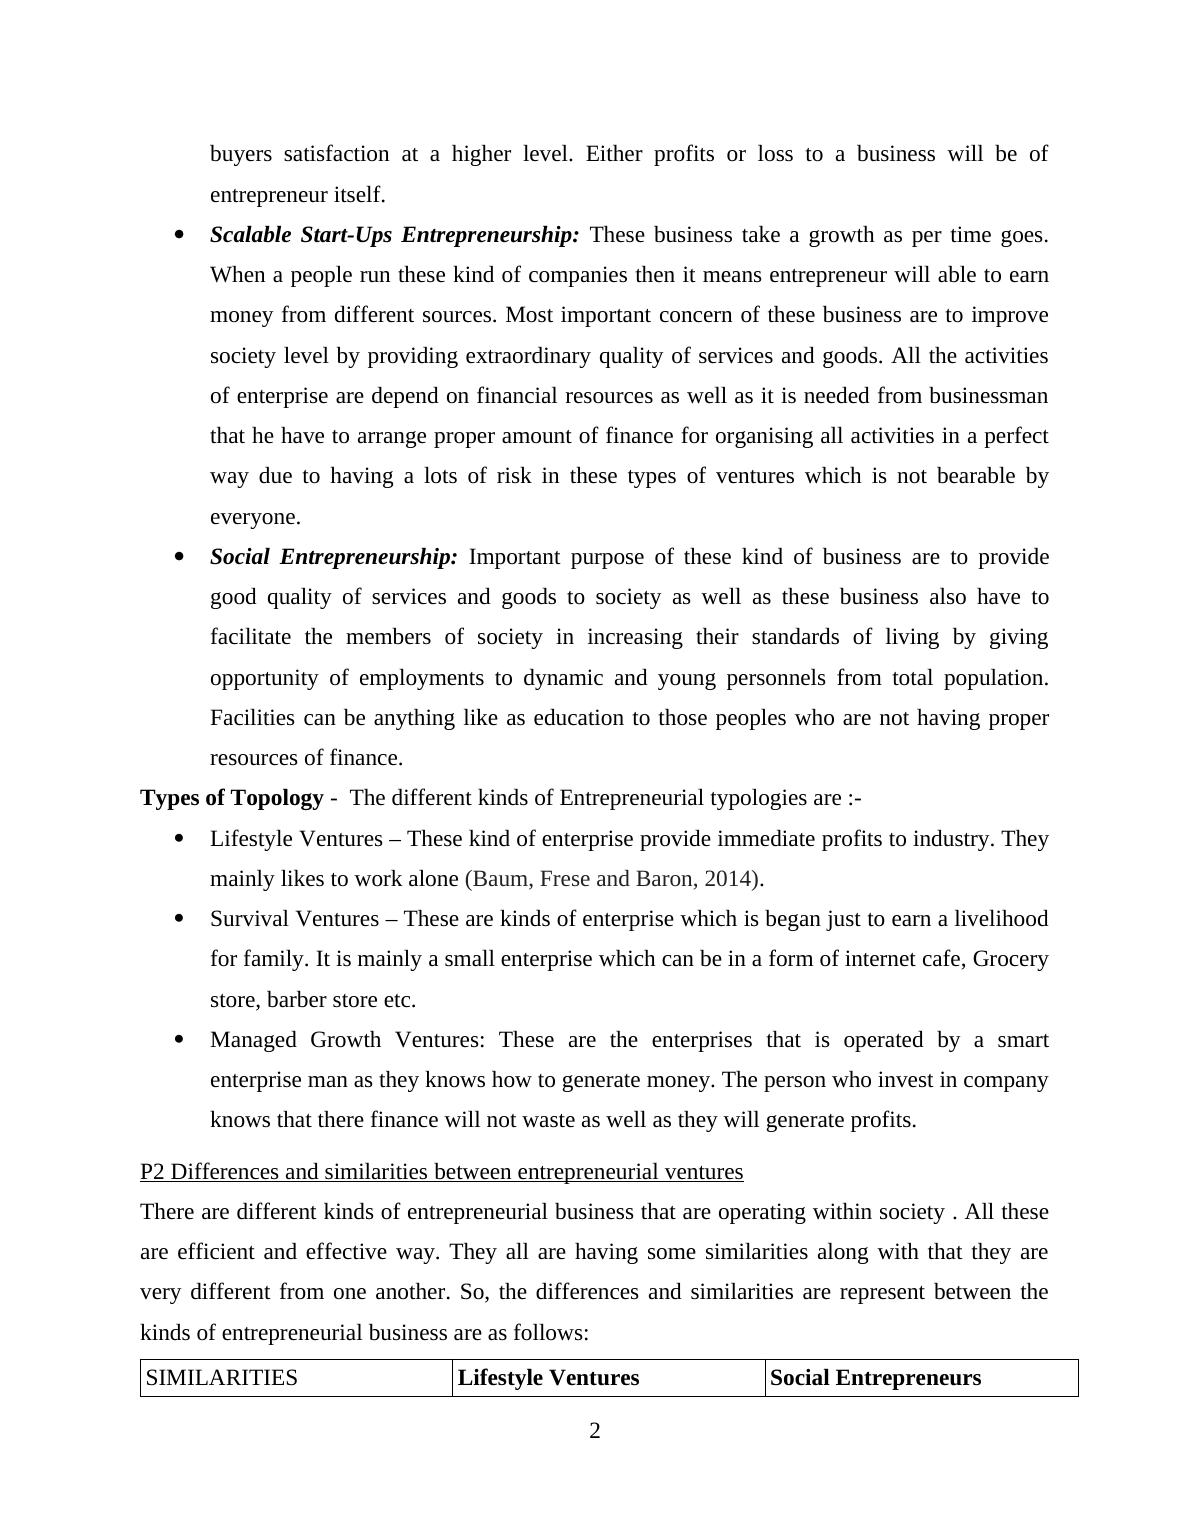 Entrepreneurial Ventures and Their Relation_4